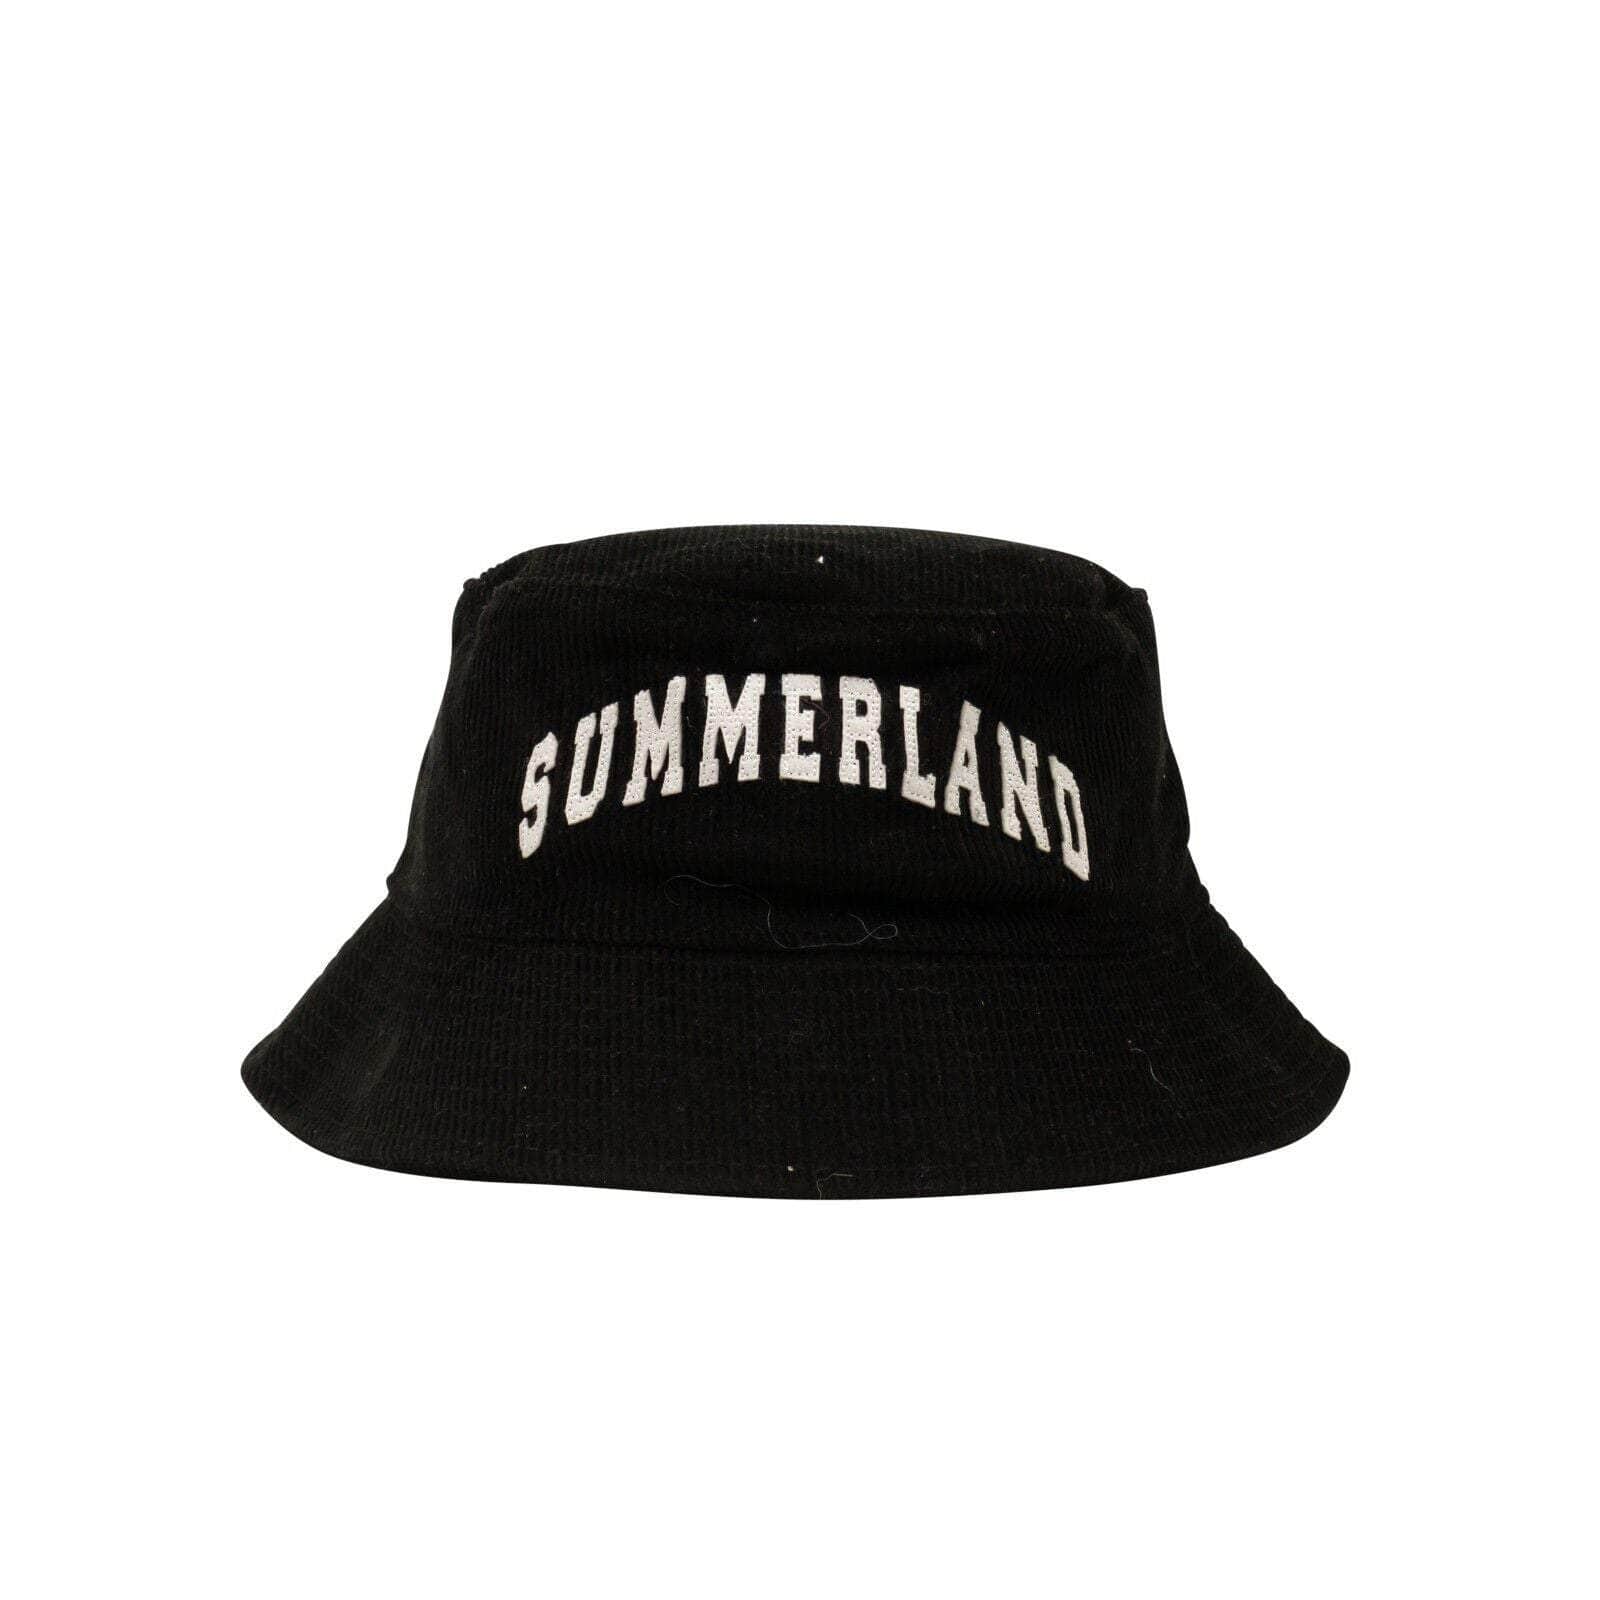 Nahmias channelenable-all, chicmi, couponcollection, gender-mens, main-accessories, mens-shoes, nahmias, size-os, under-250 OS Black Cotton Corduroy Summerland Bucket Hat NMS-XACC-0004/OS NMS-XACC-0004/OS